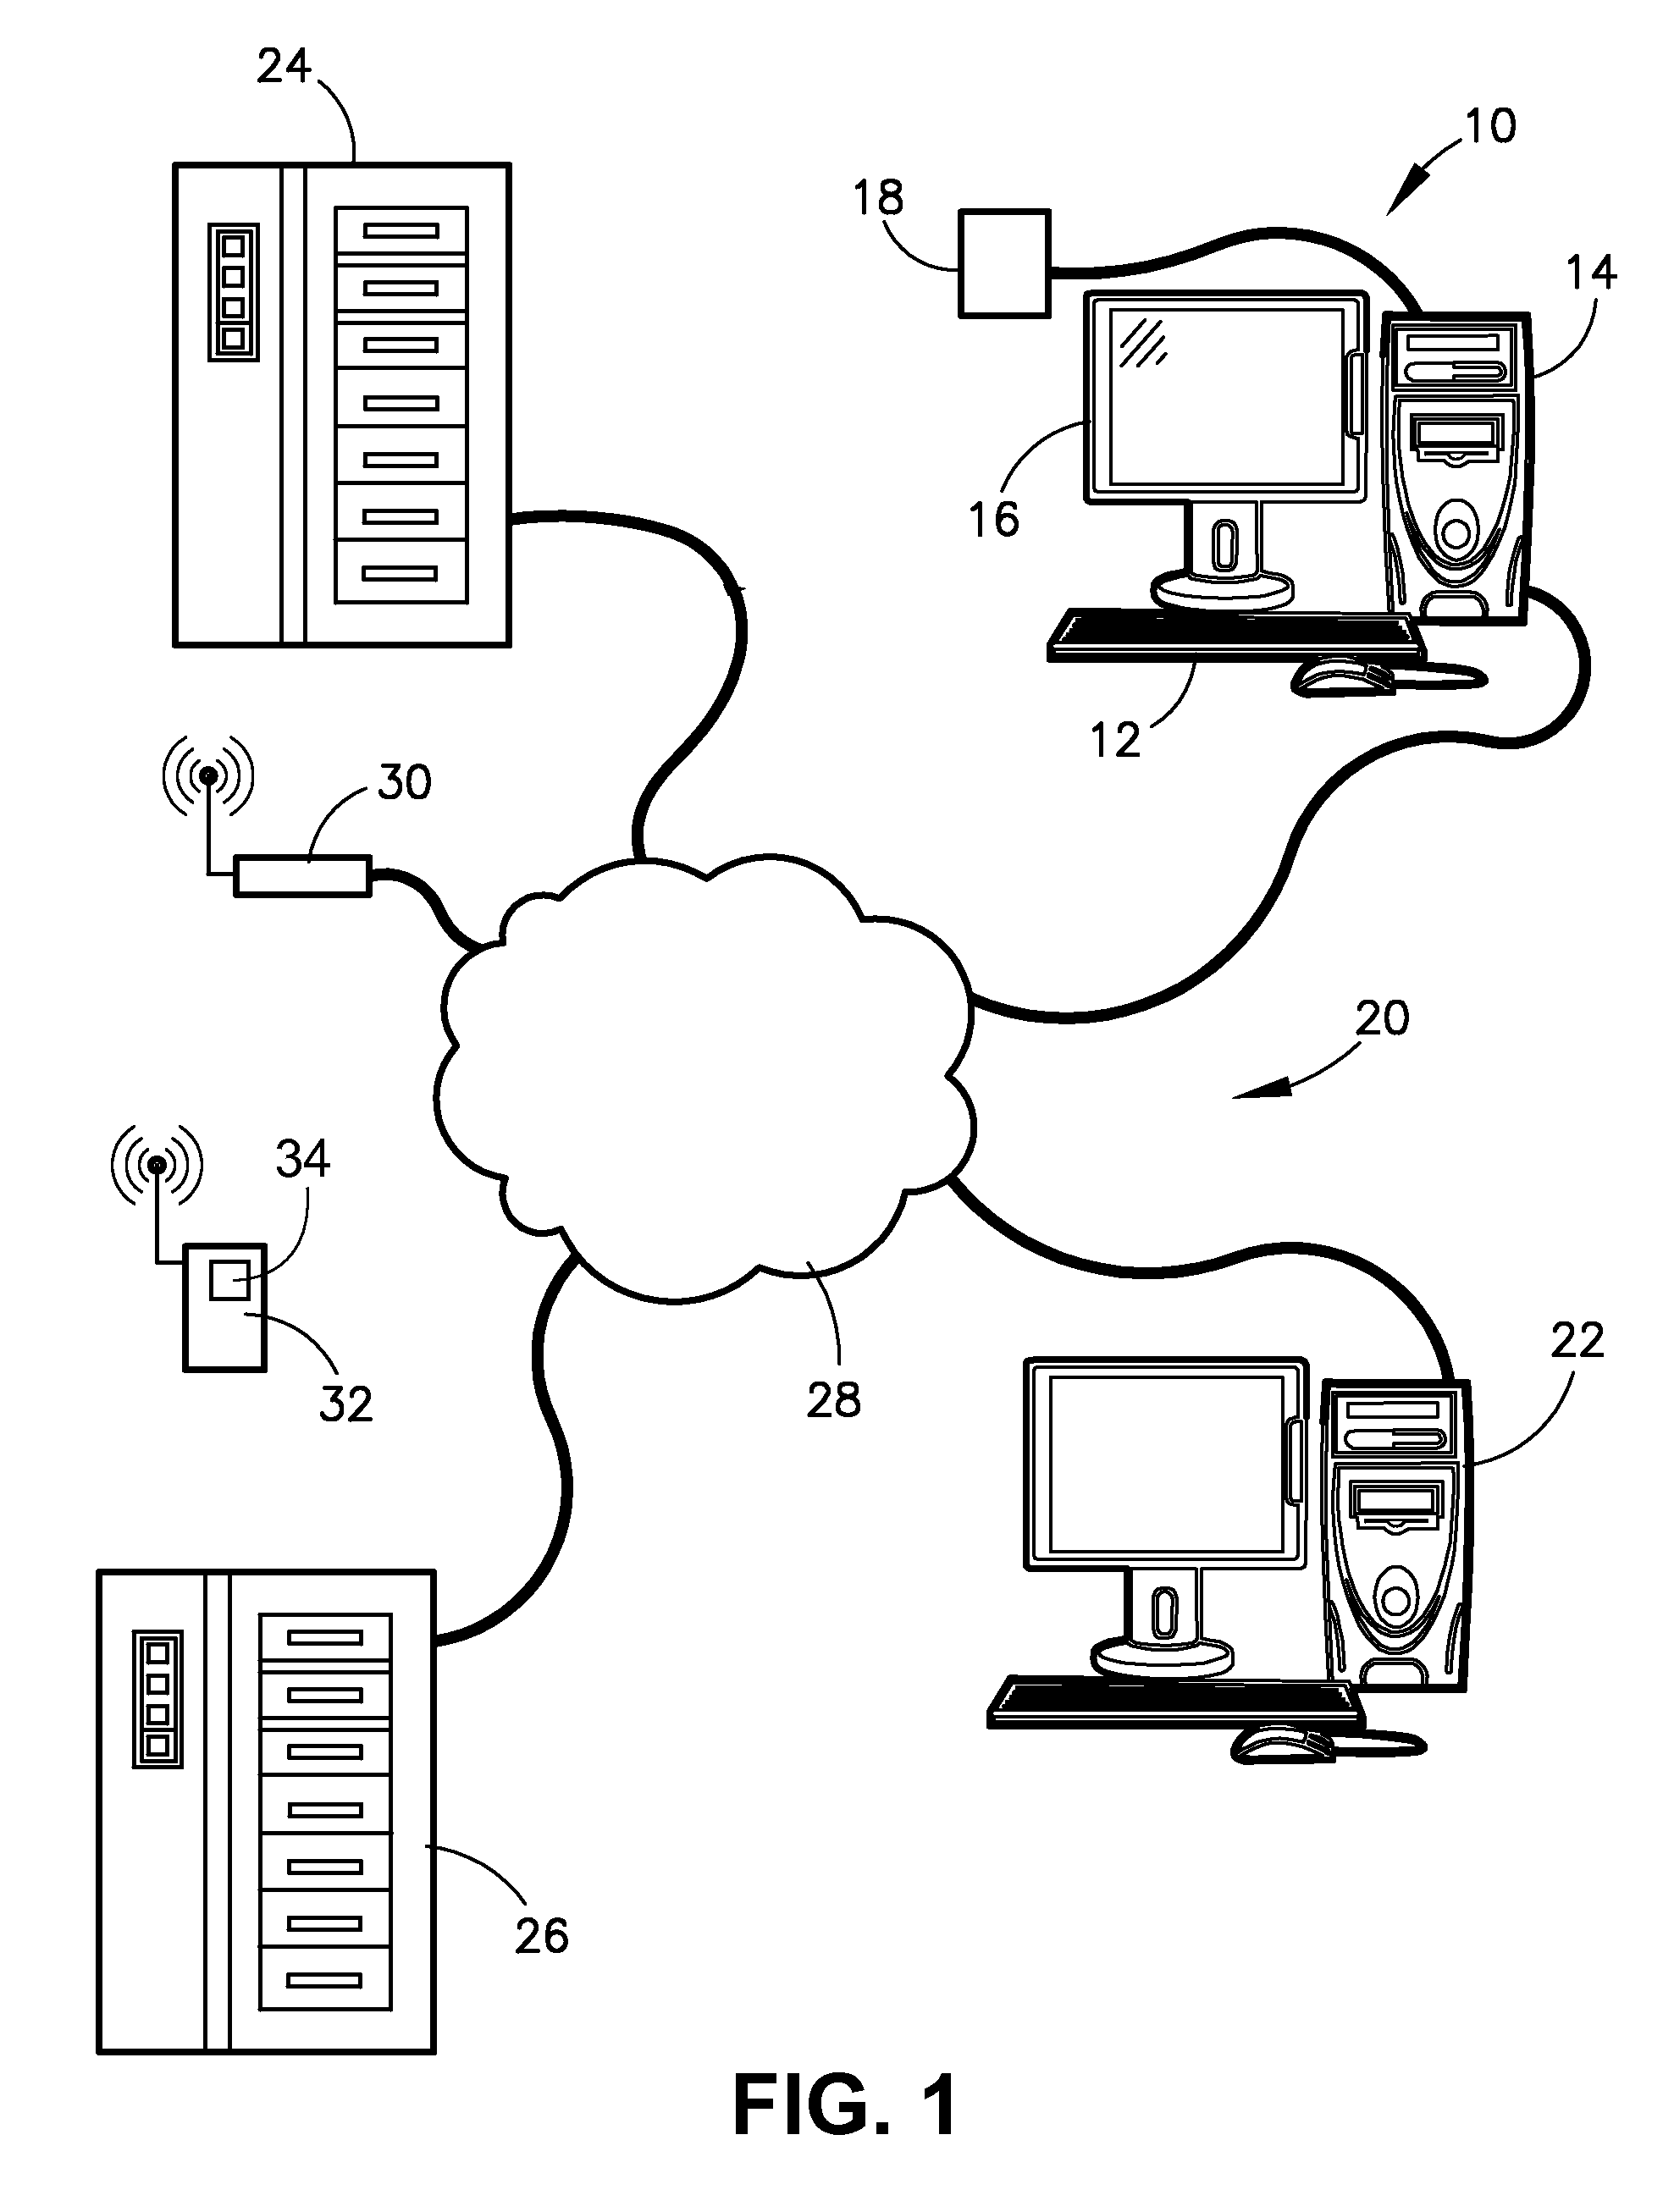 System and method for secure and/or interactive dissemination of information